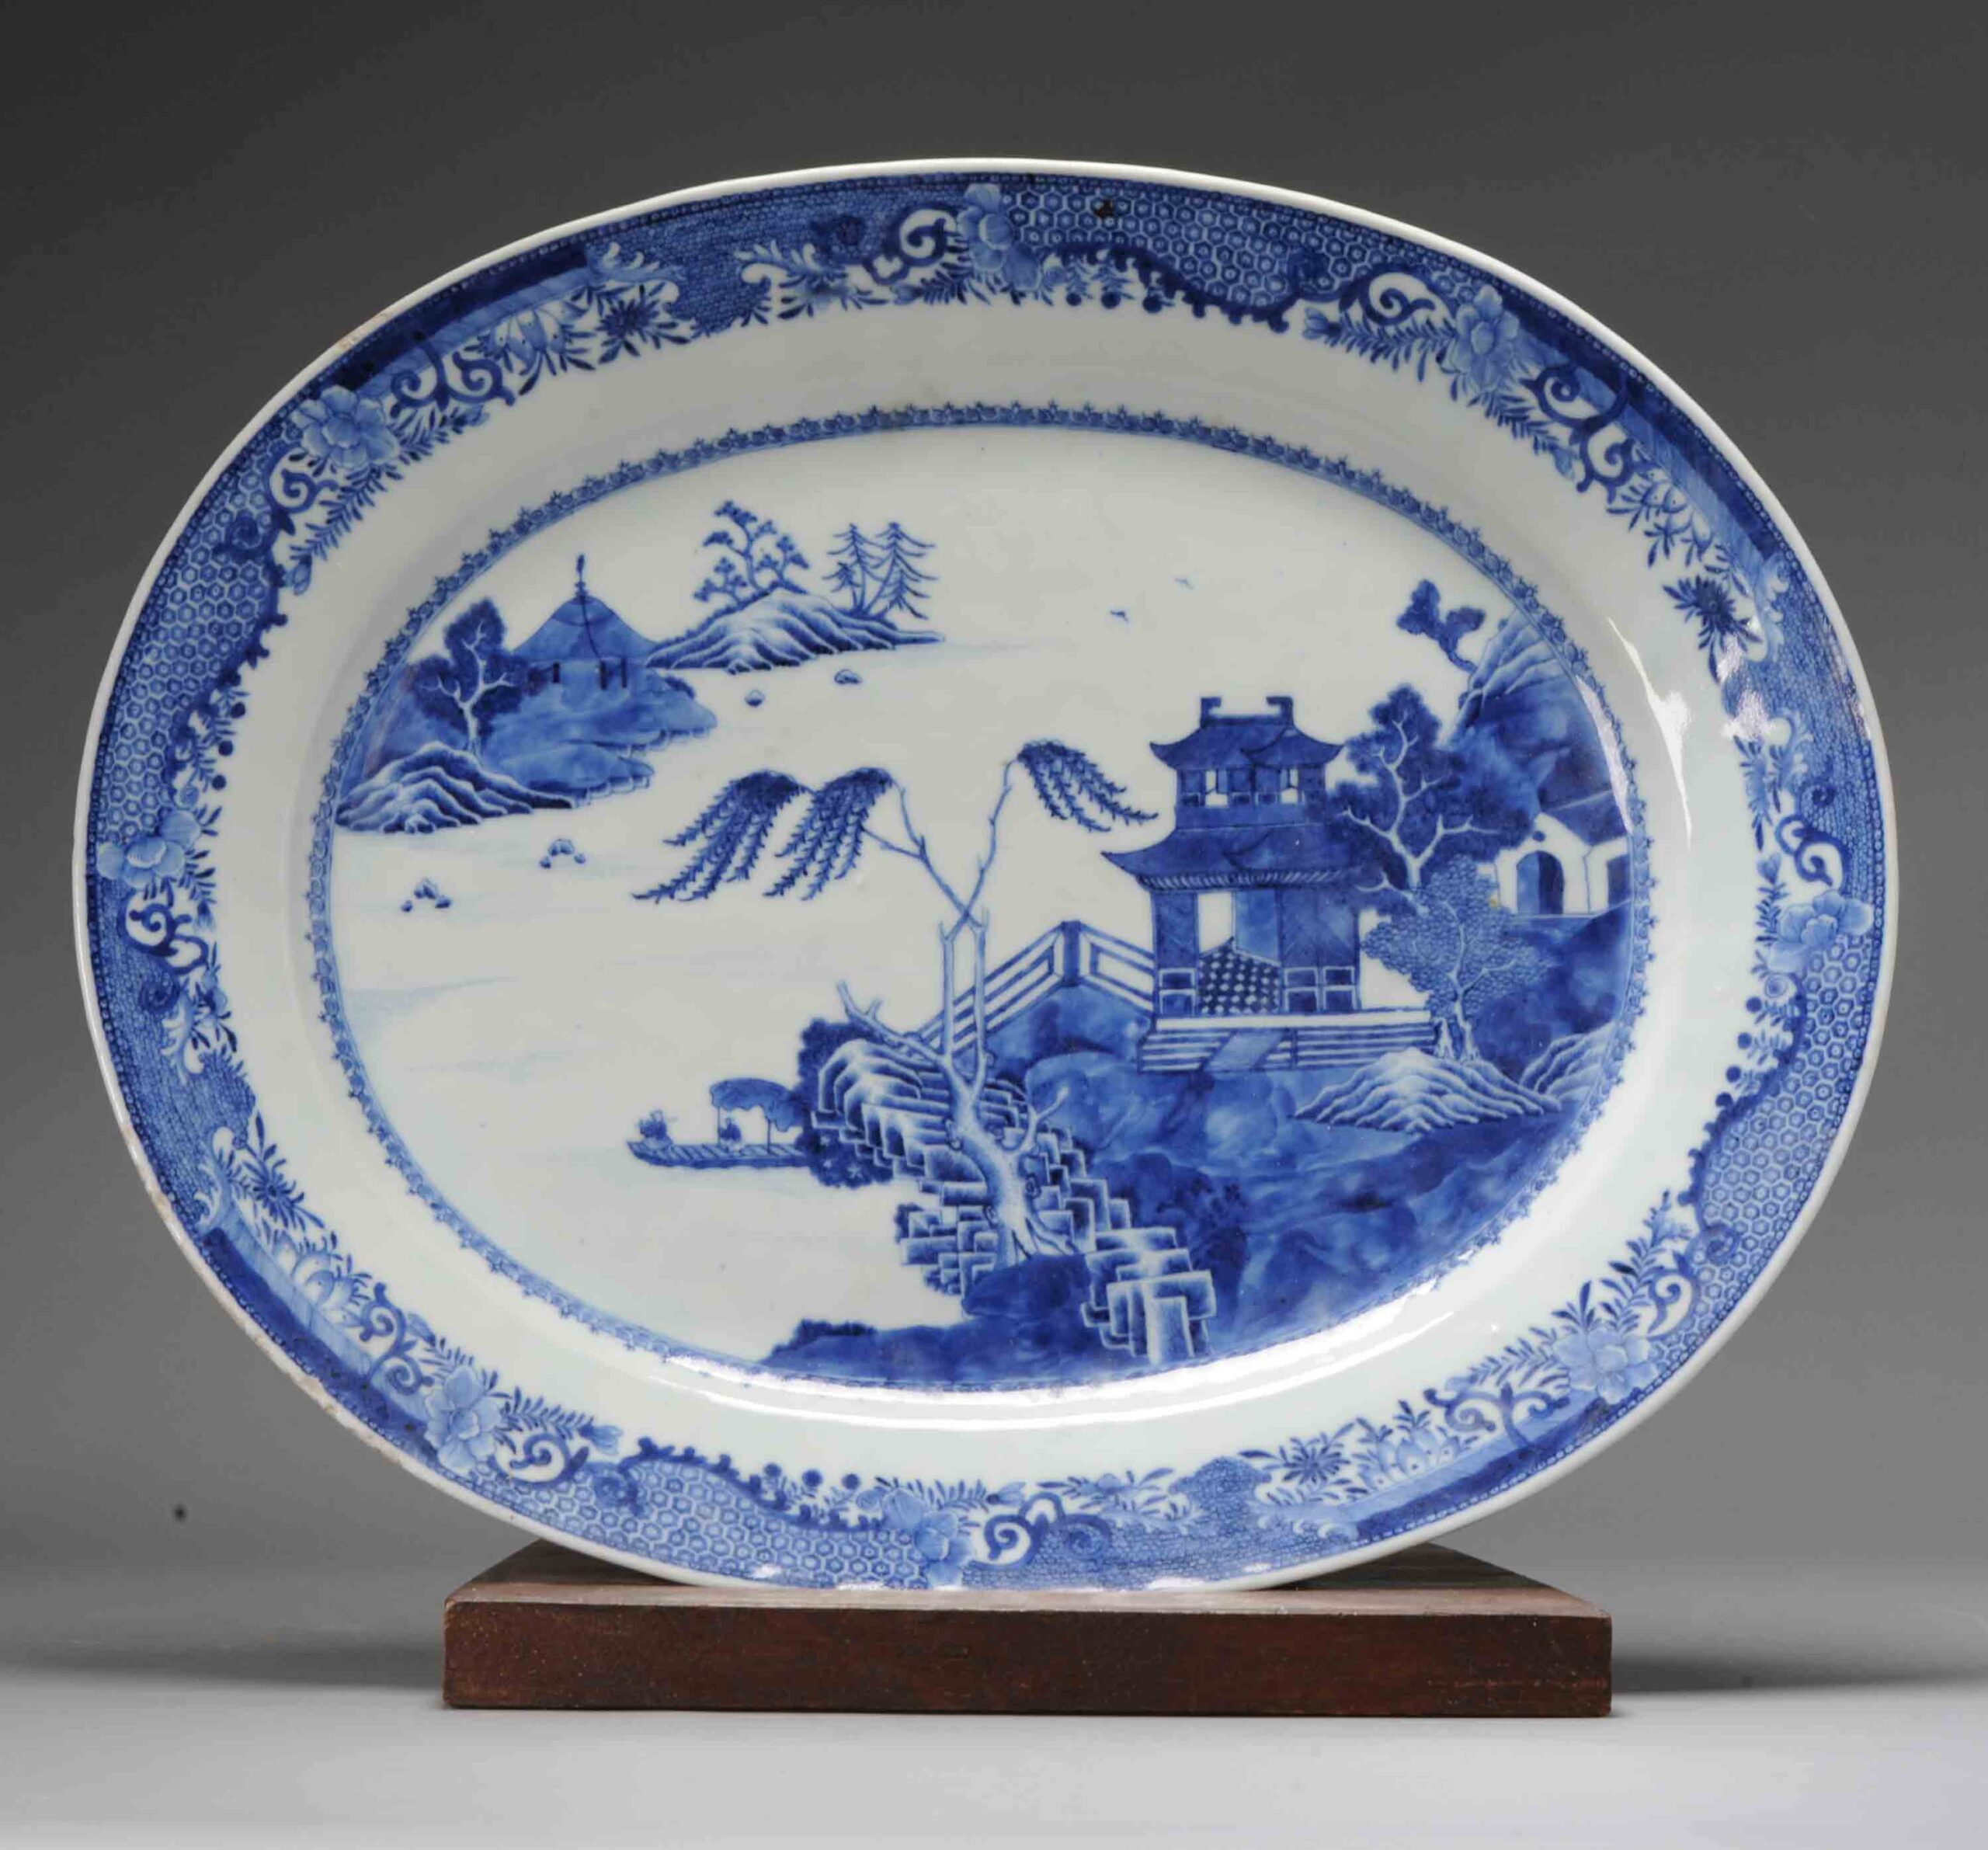 Very Rare Antique Chinese Porcelain Charger Landscape of Qianlong Top Quality